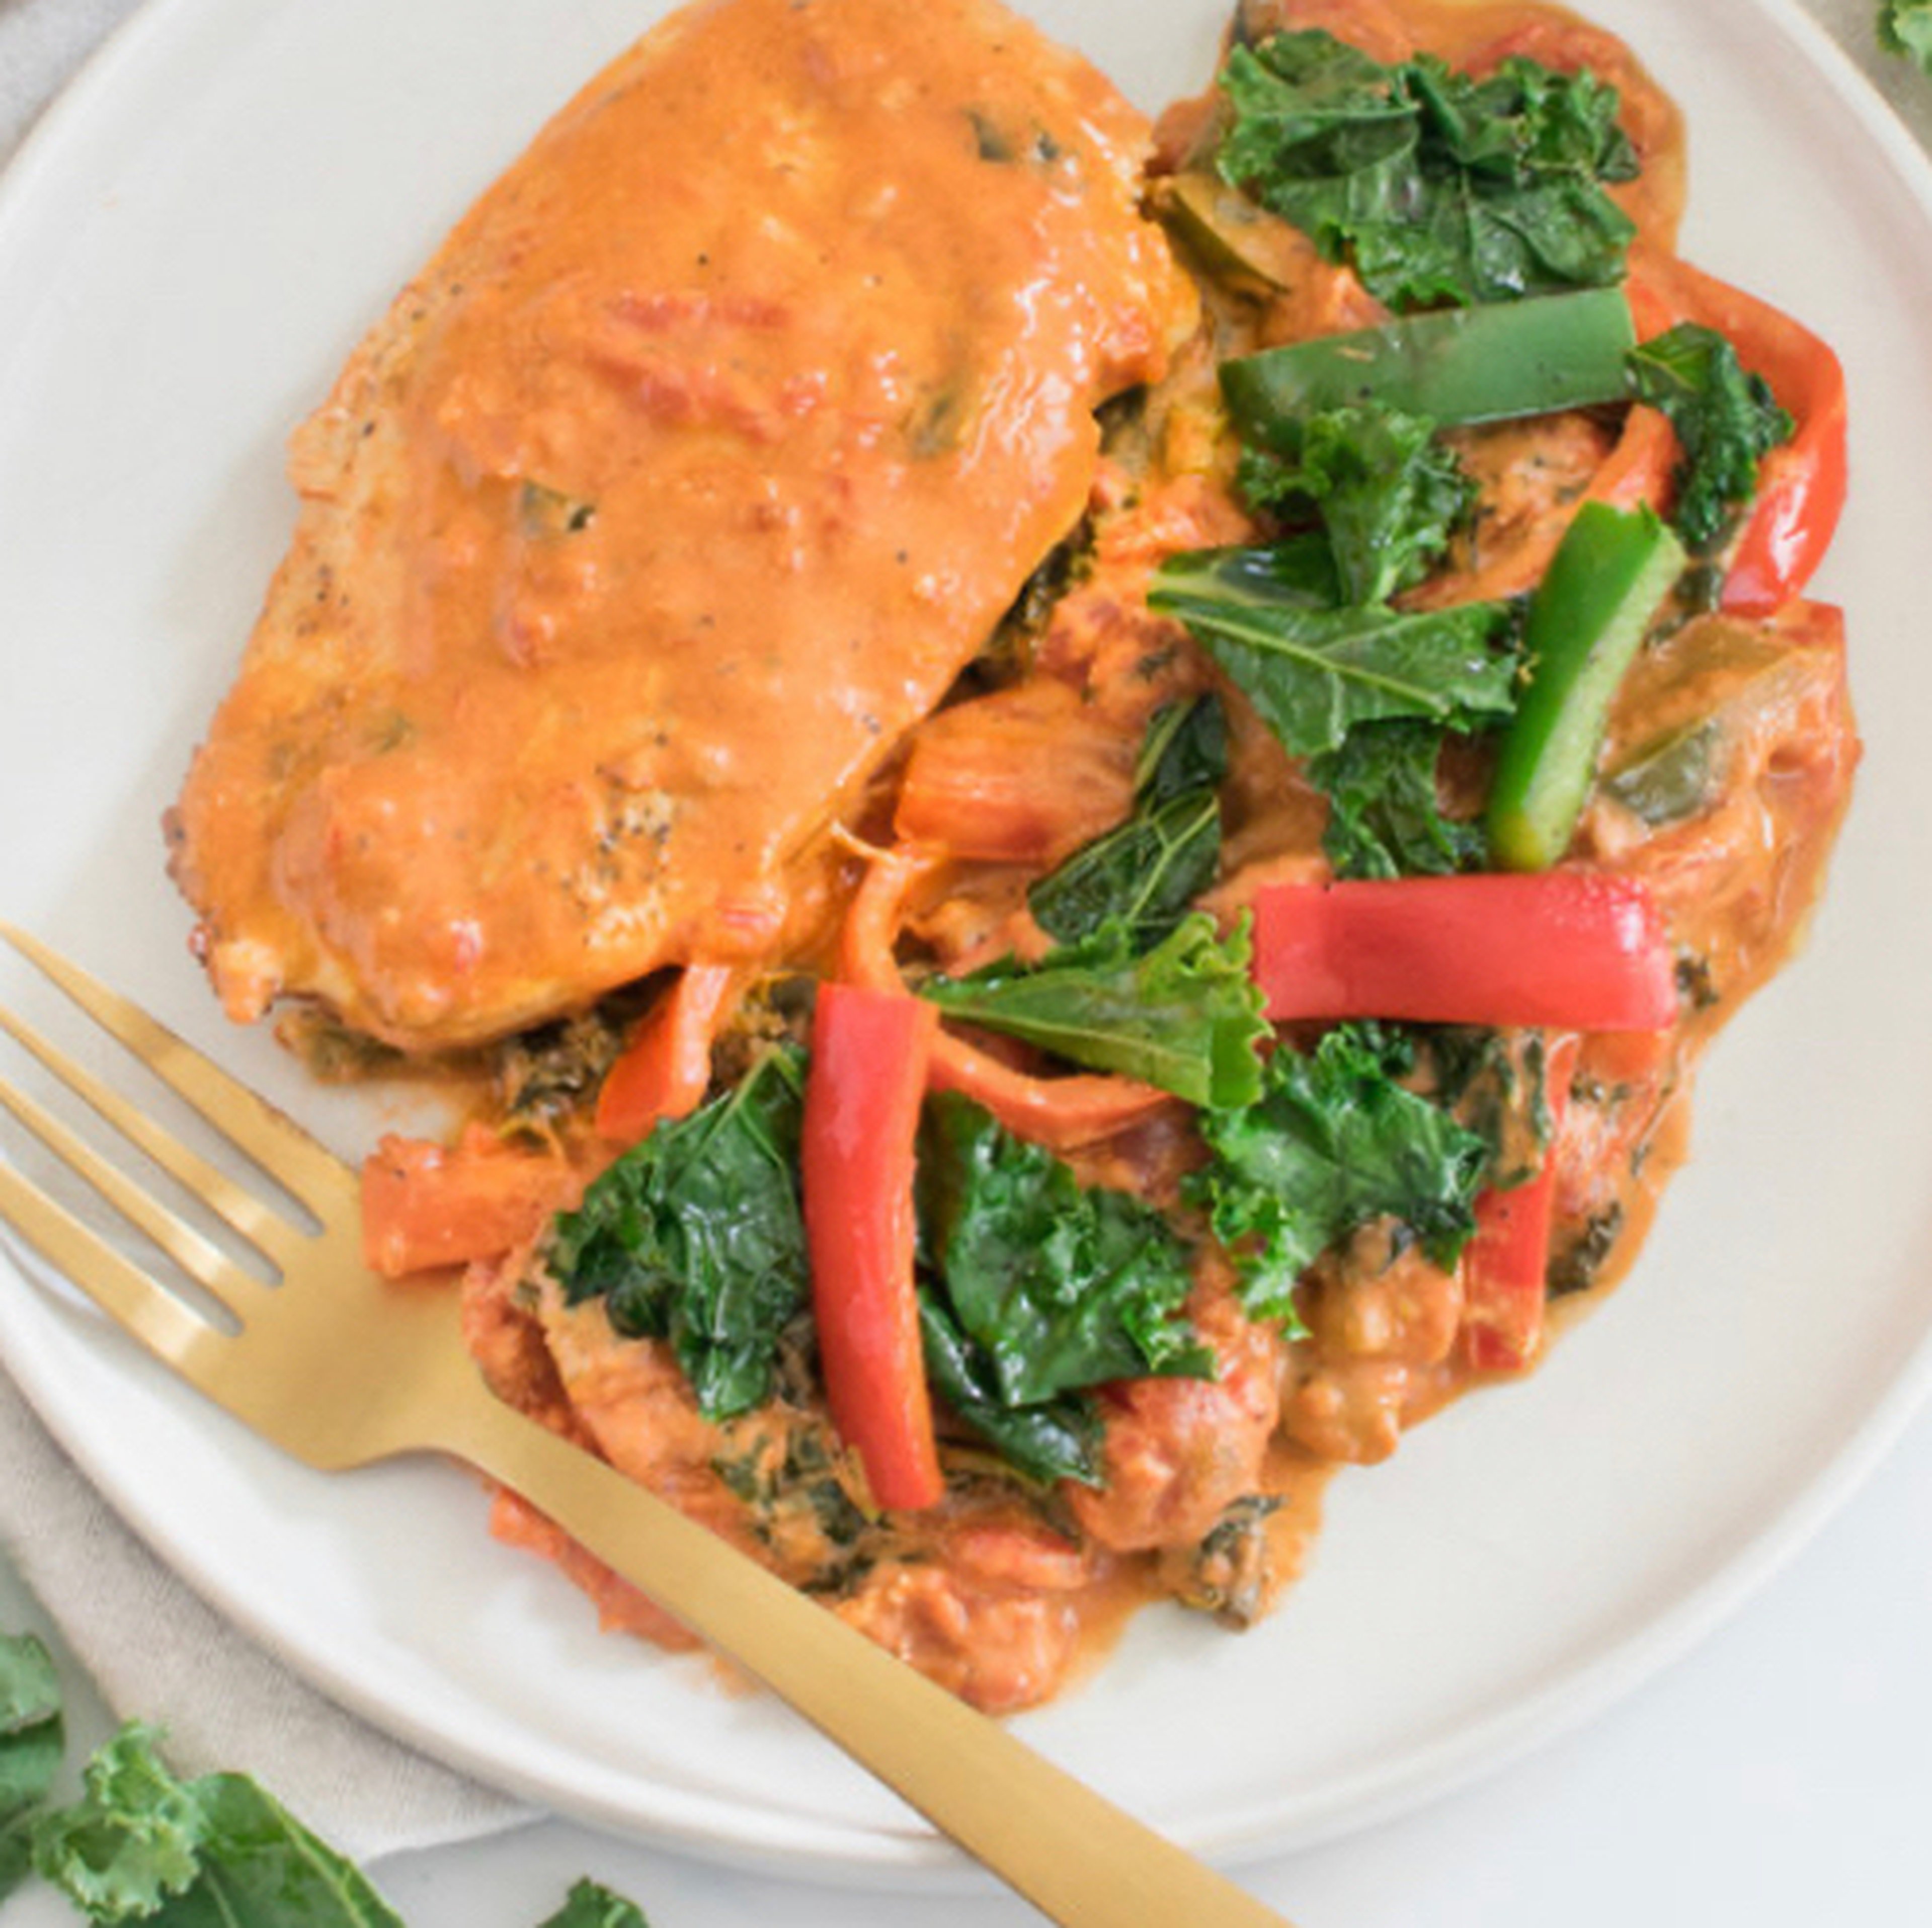 Creamy Cajun chicken with kale & bell peppers